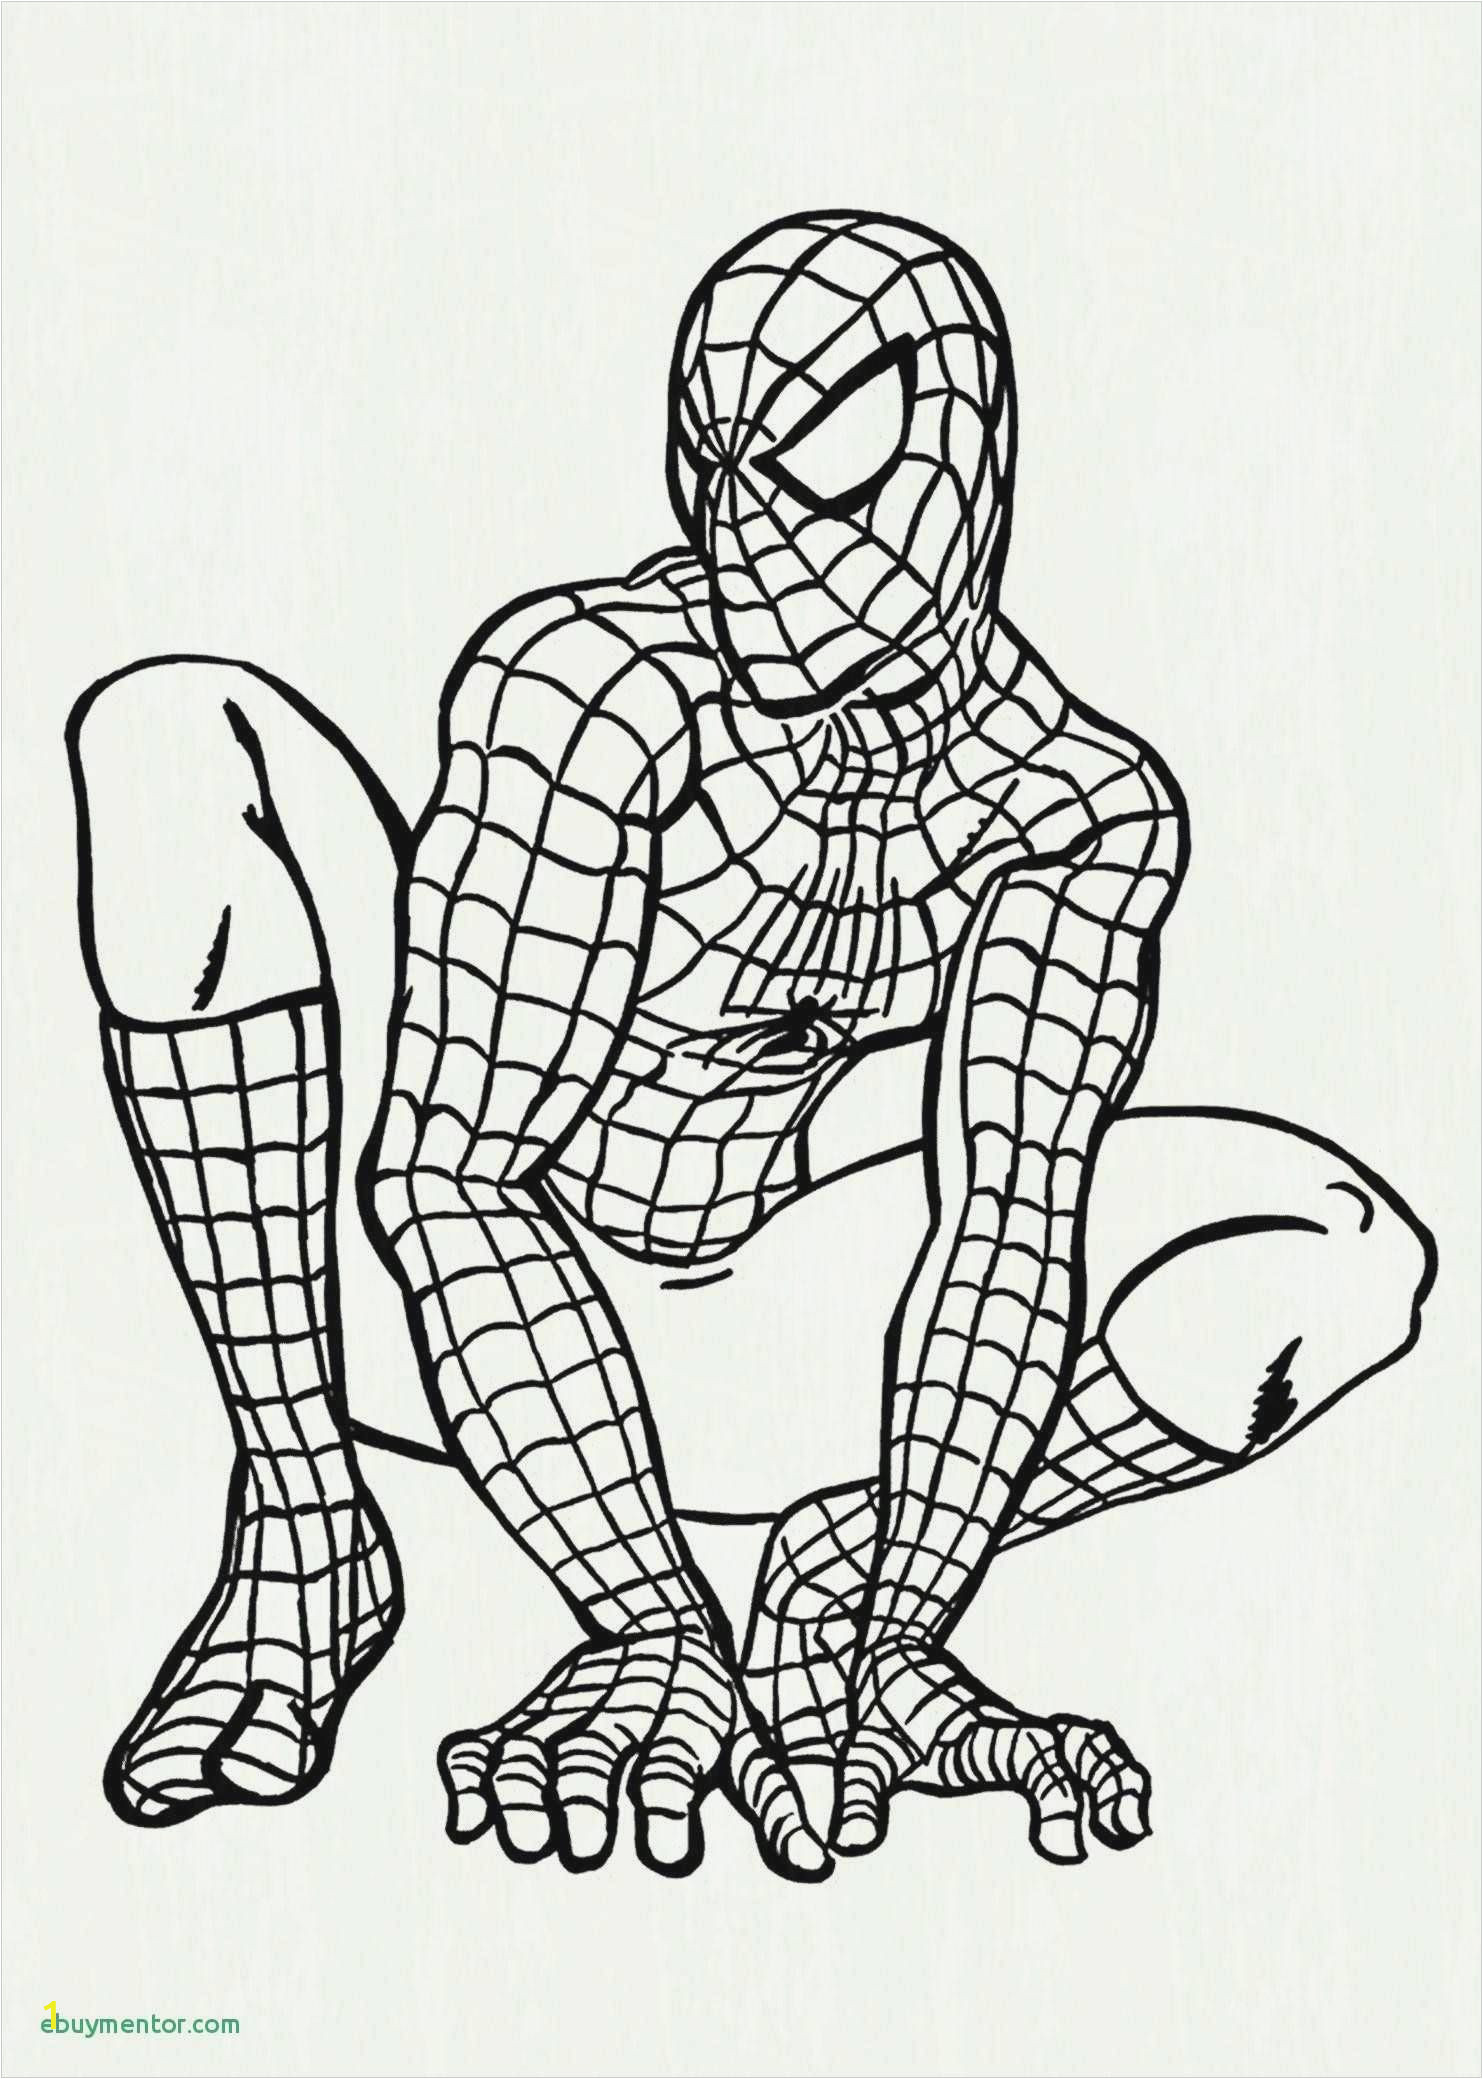 Spiderman Coloring Pages Online Game | divyajanani.org